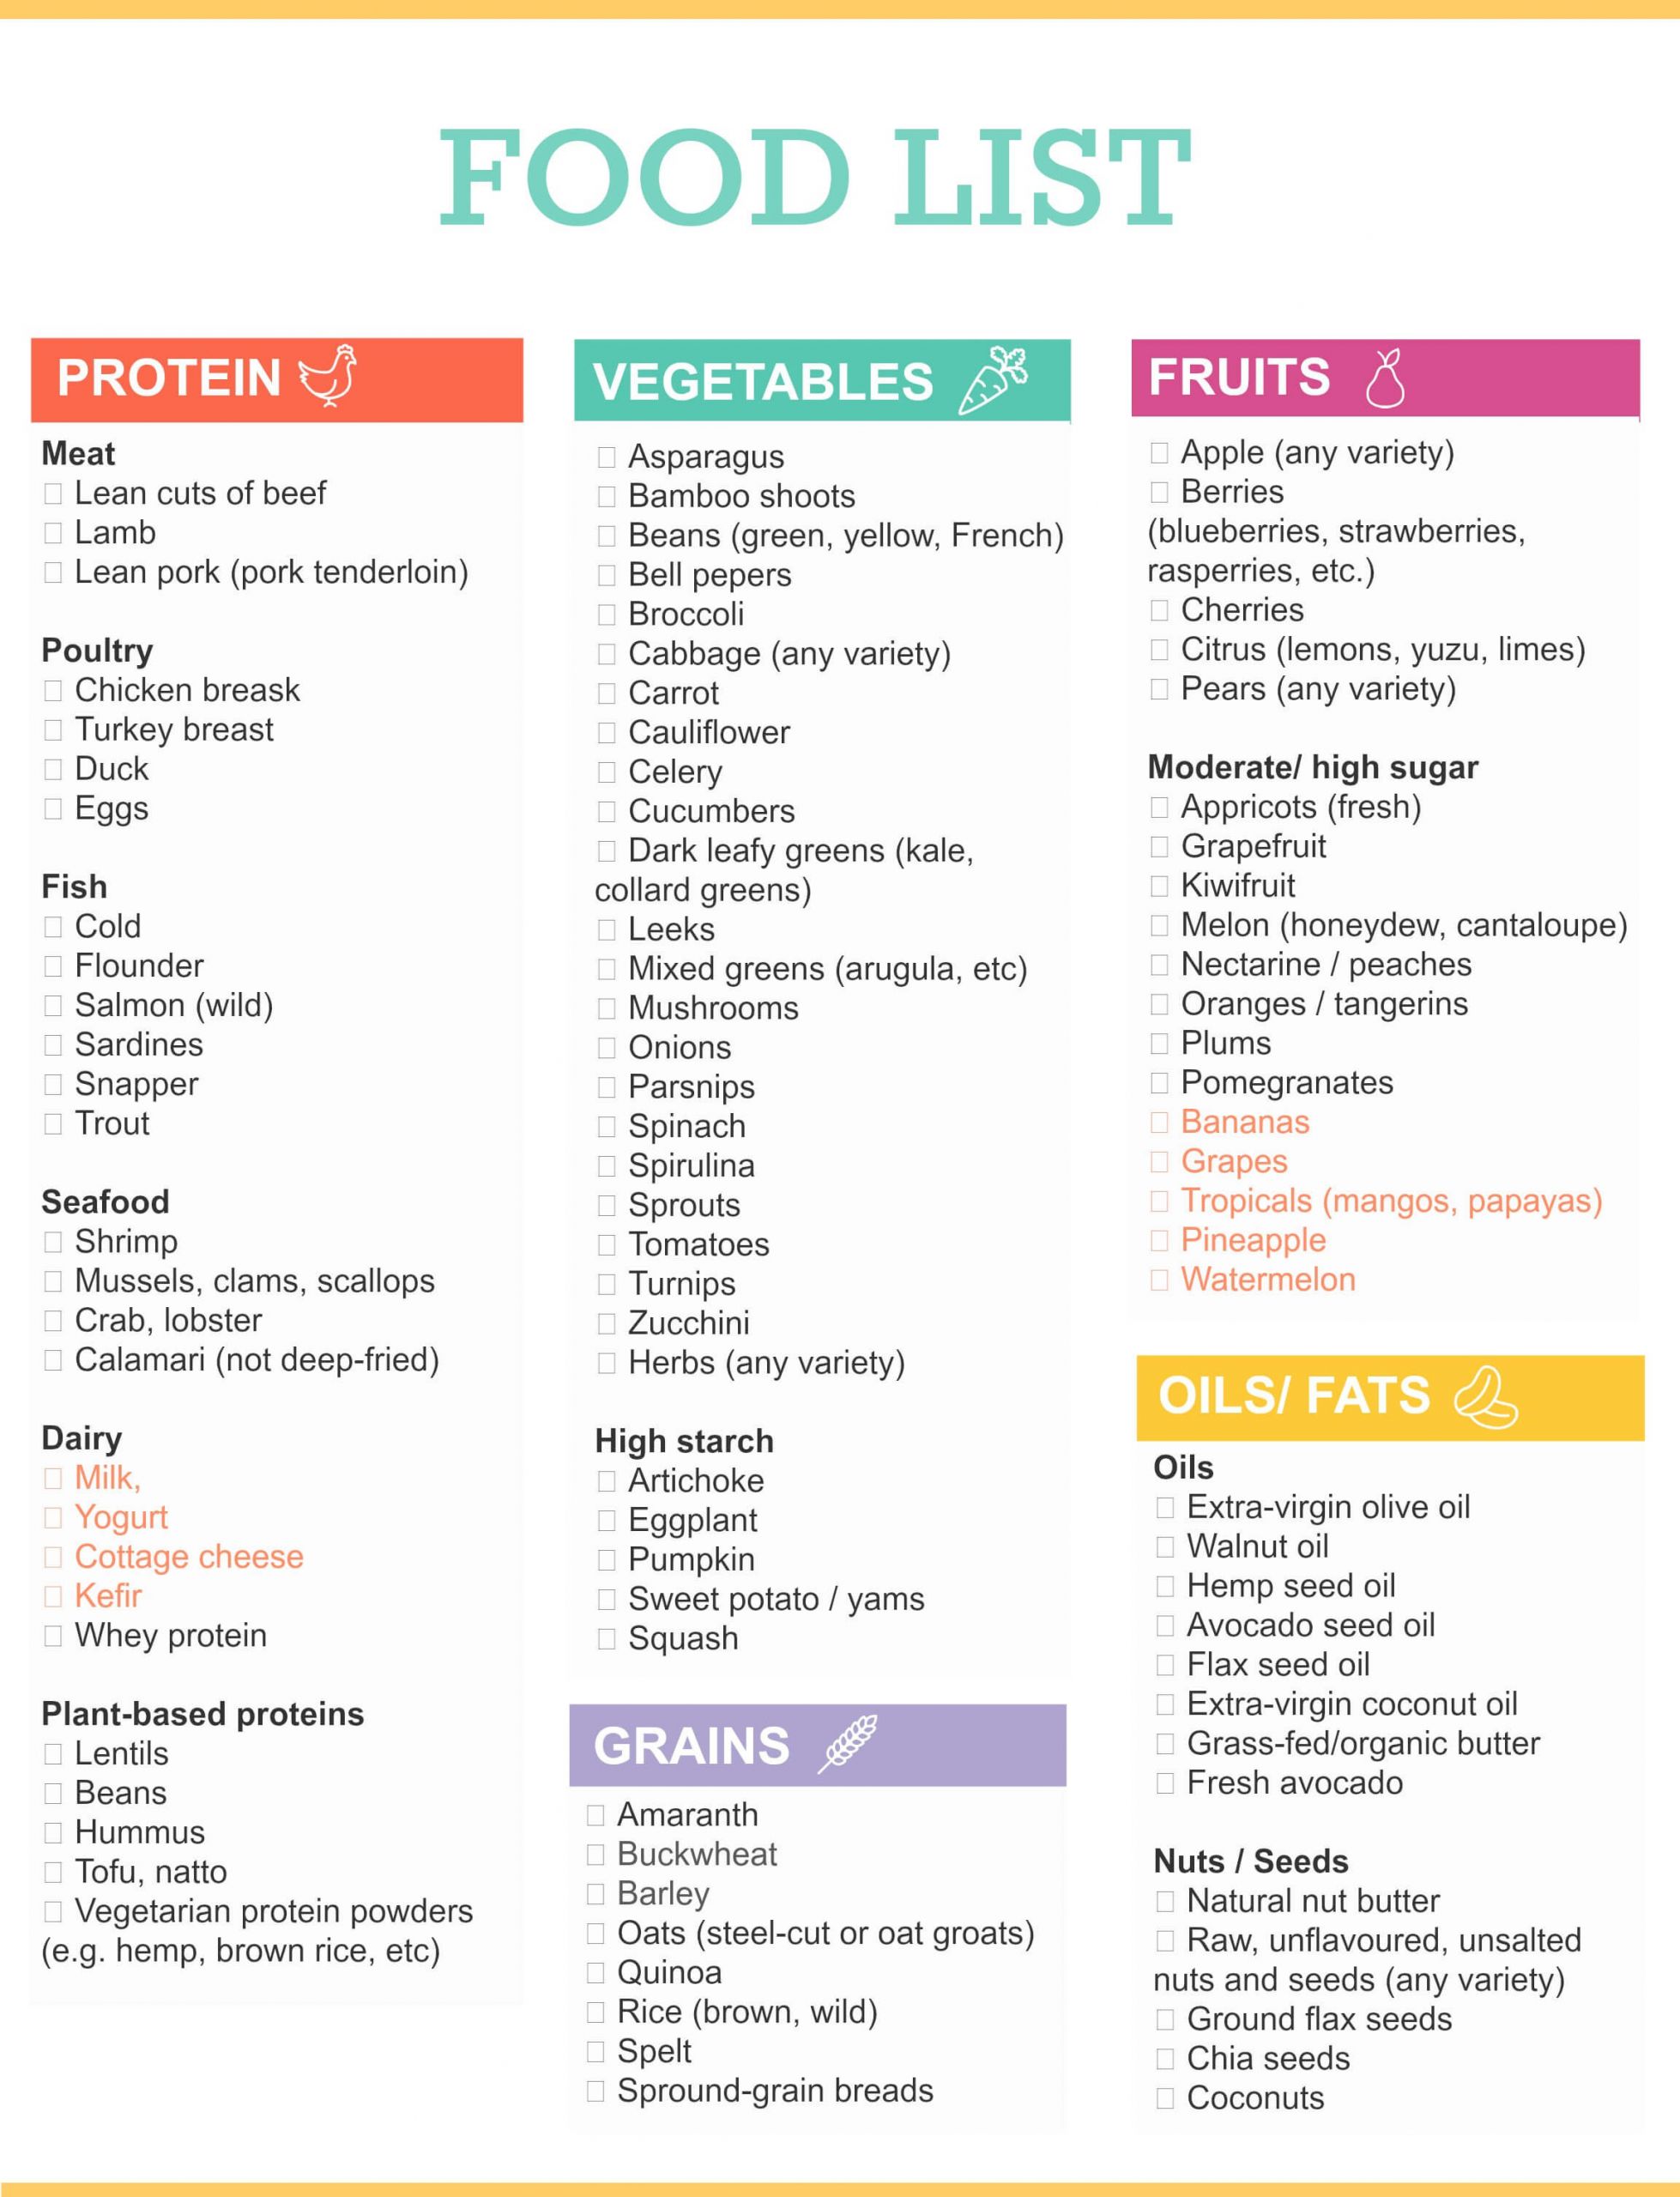 Low Fat Diet Grocery List Beautiful The Ultimate Healthy Grocery List For Buying Healthy Foods Of Low Fat Diet Grocery List Scaled 